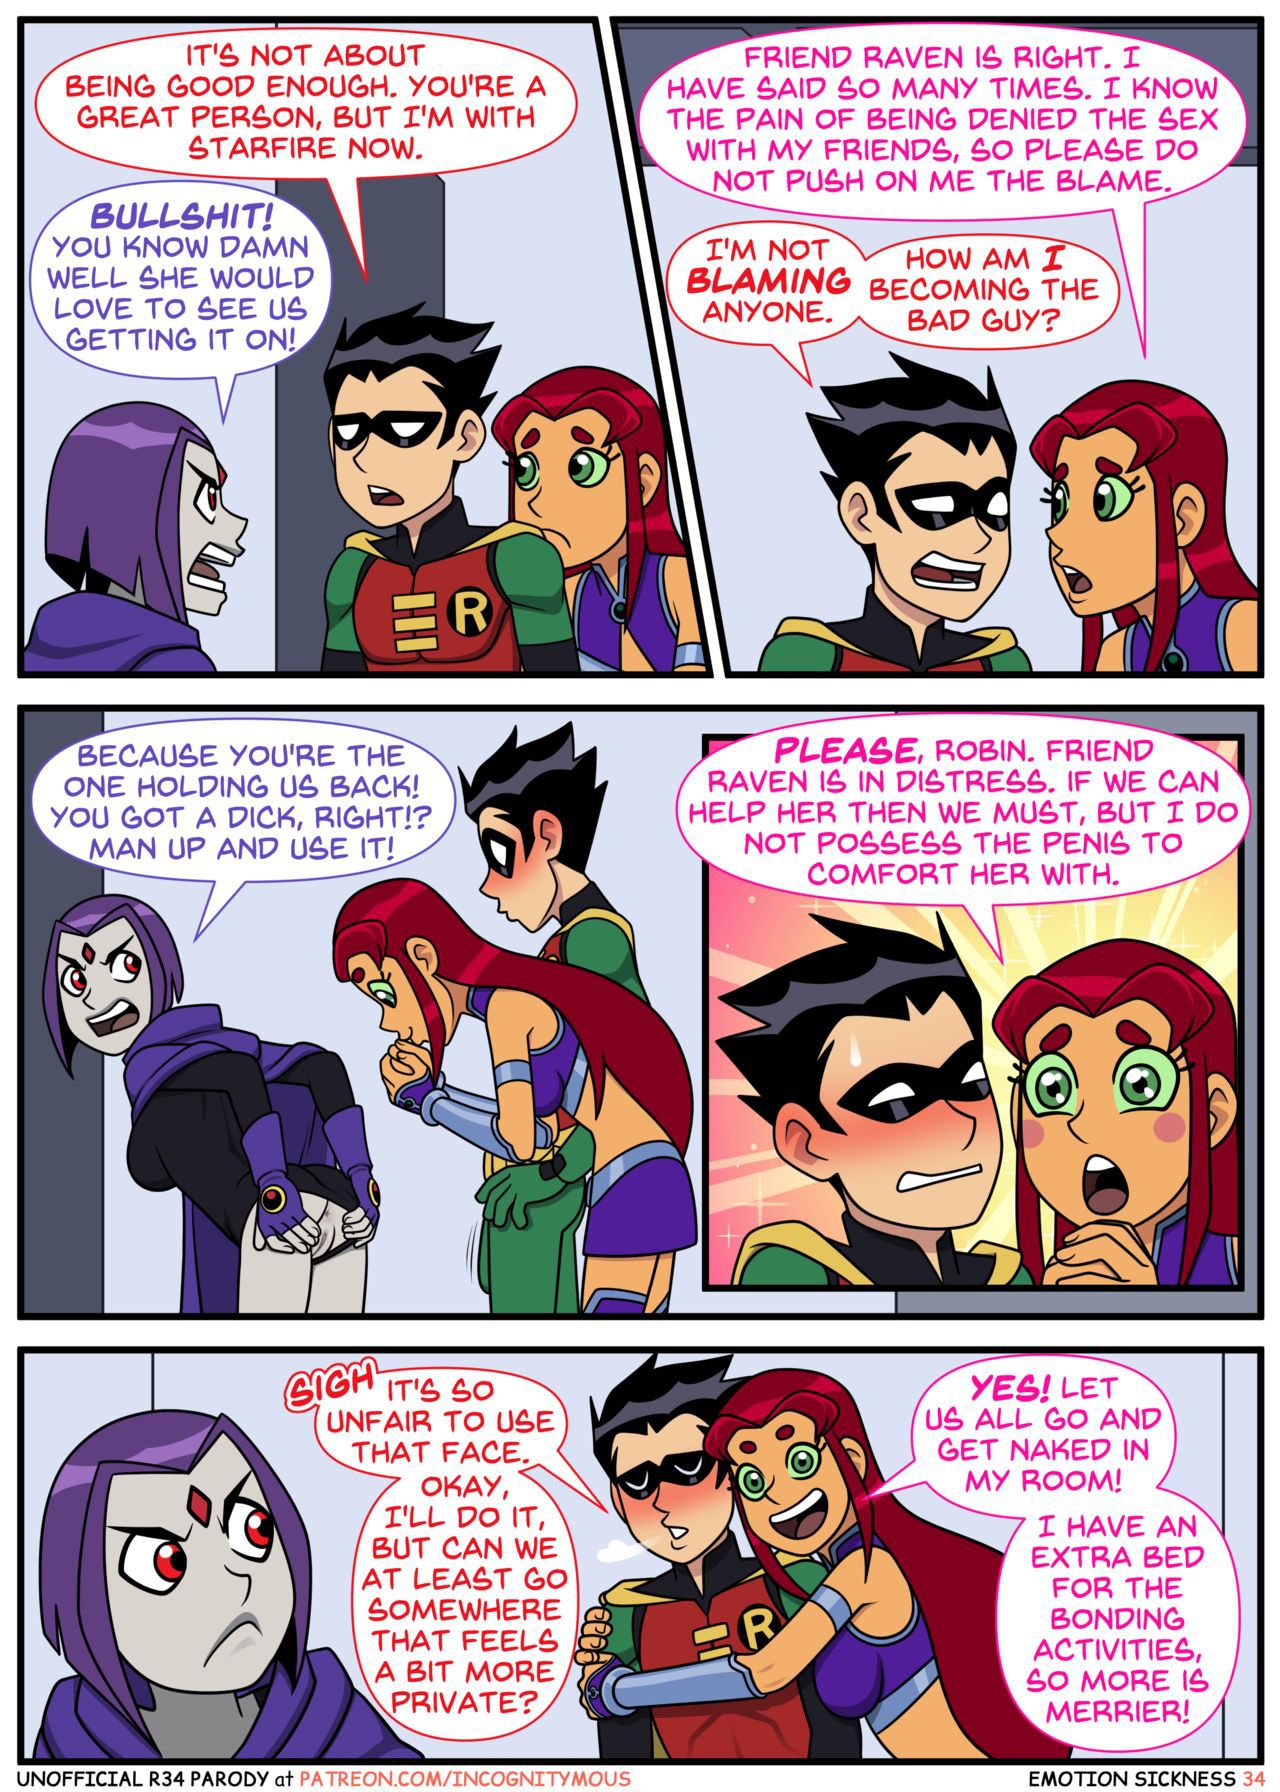 (Incognitymous) Teen Titans - Emotion Sickness(ongoing) 33